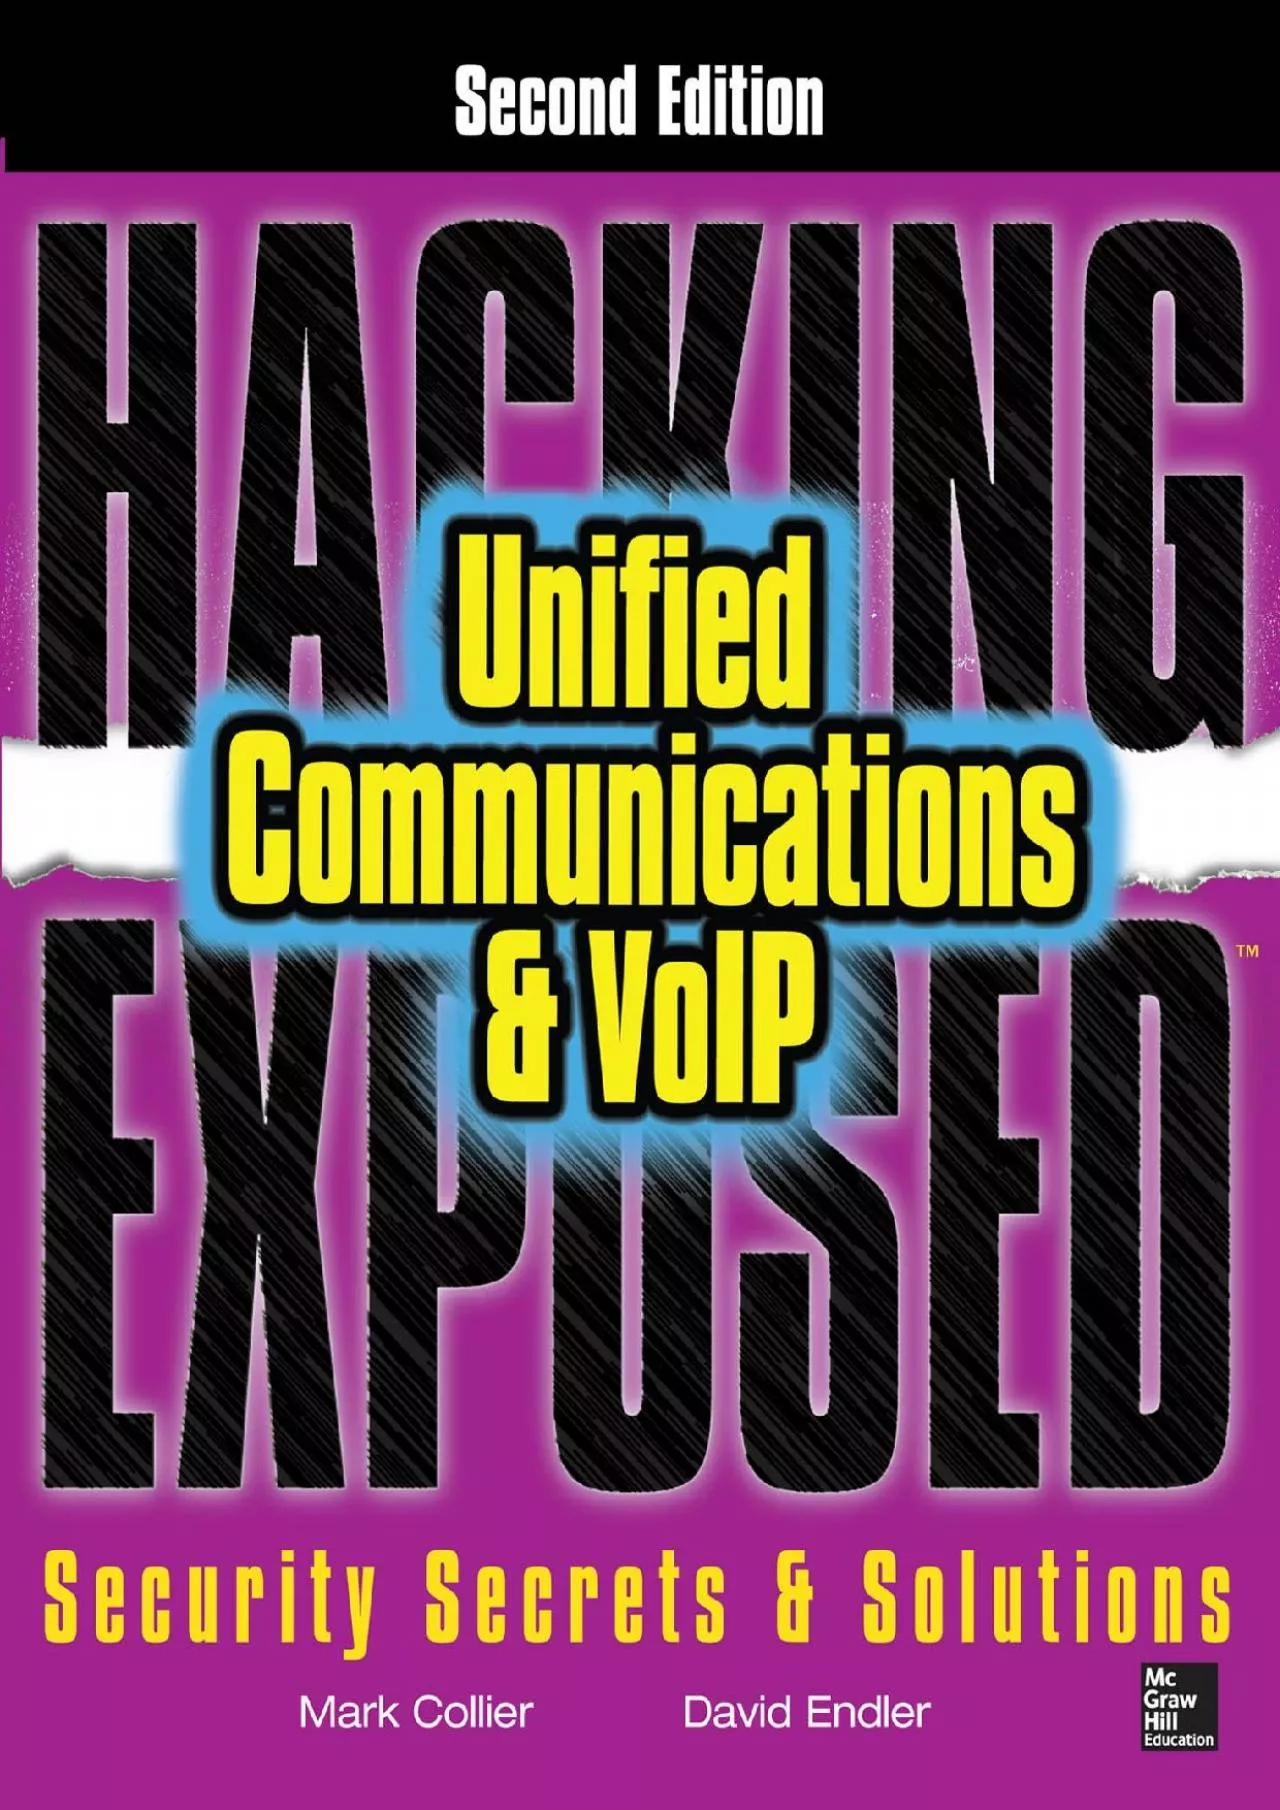 [BEST]-Hacking Exposed Unified Communications  VoIP Security Secrets  Solutions, Second